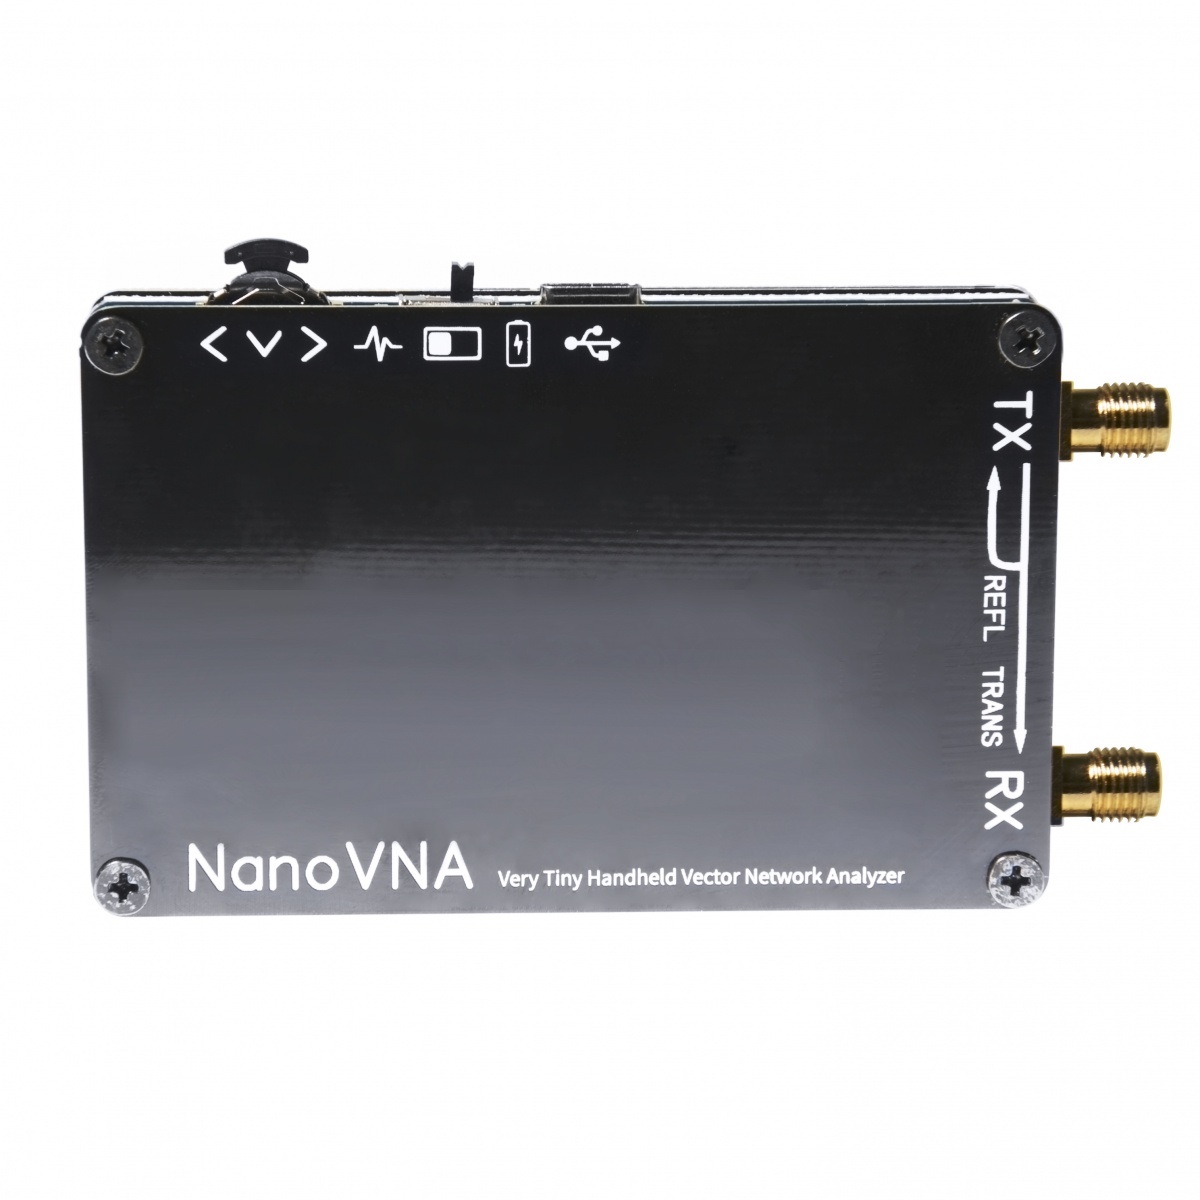 Nooelec NanoVNA-H 4 Premium Bundle EMI Shielding 4 LCD Vector Network Analyzer Kit from Authorized Distributor with 50kHz-1.5GHz+ Portable VNA 6pc Attenuator Kit and Much More! Calibration Kit